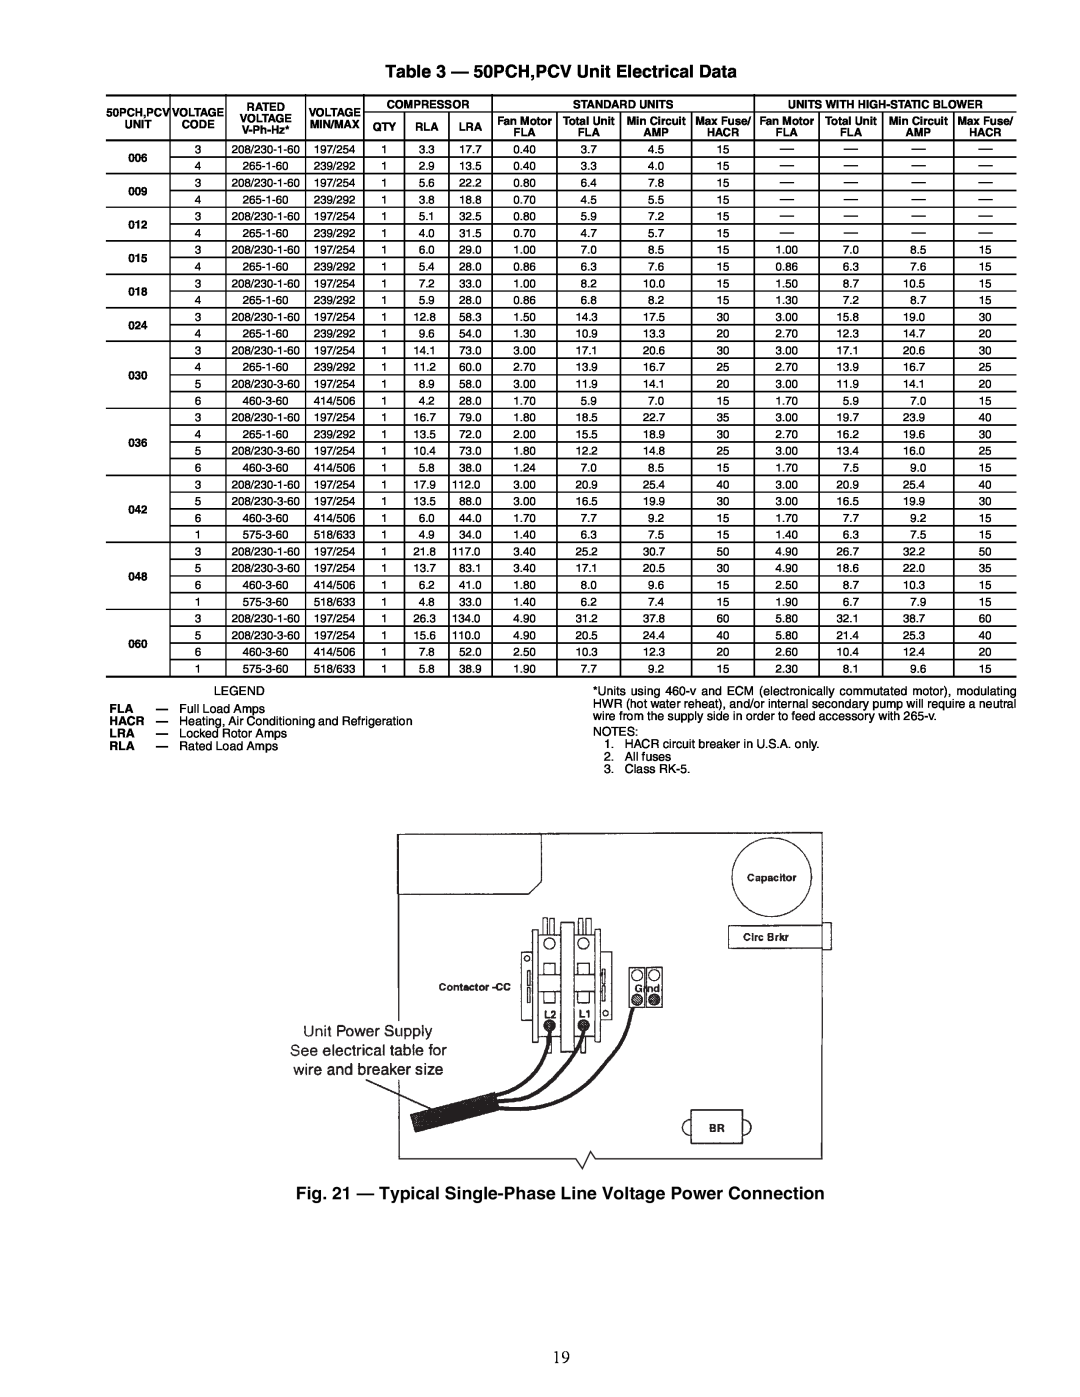 Carrier specifications 50PCH,PCV Unit Electrical Data, a50-8162 